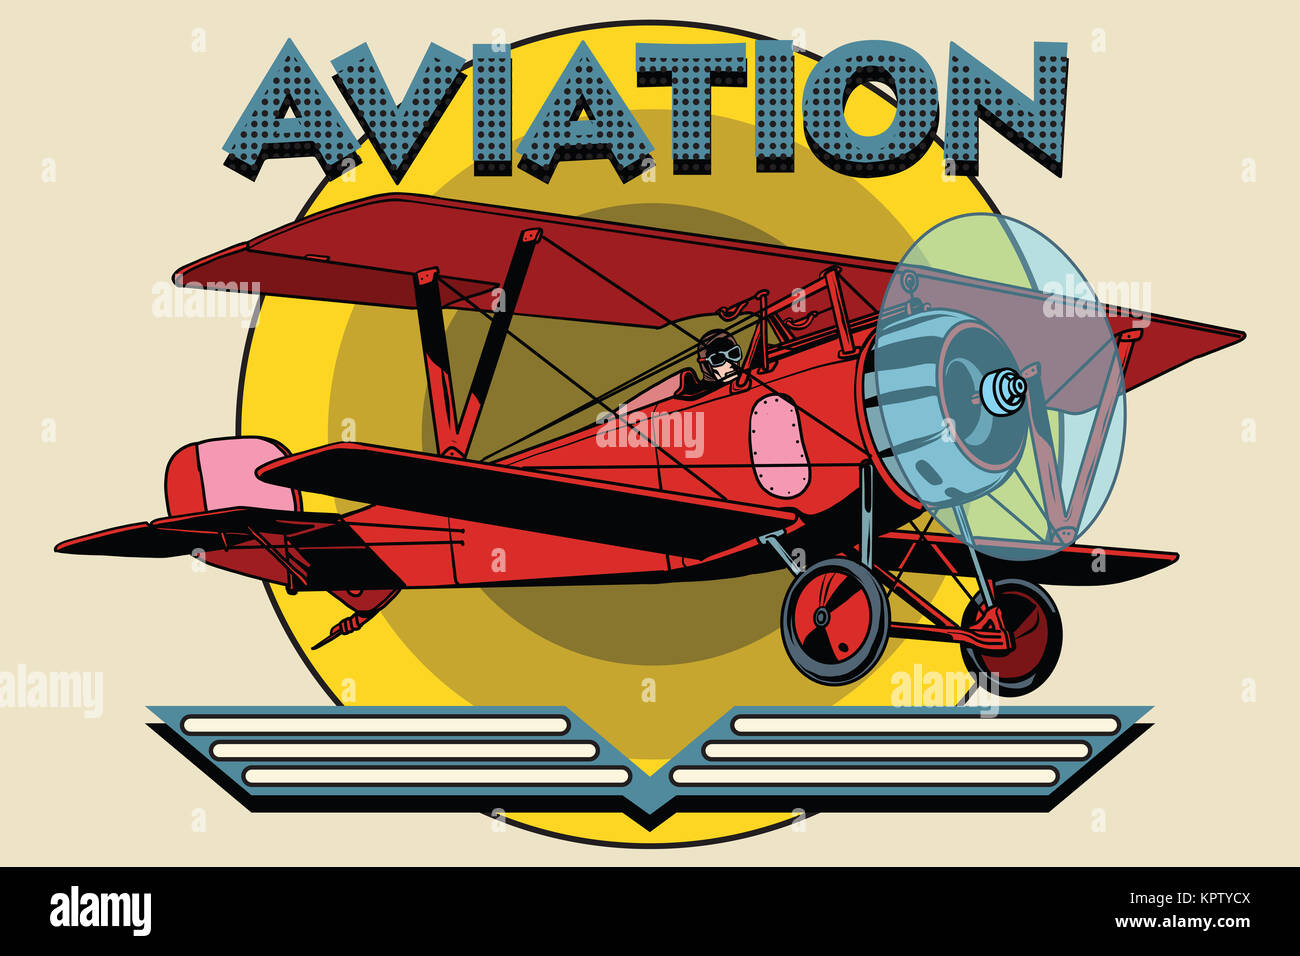 Retro two-winged plane aviation poster Stock Photo